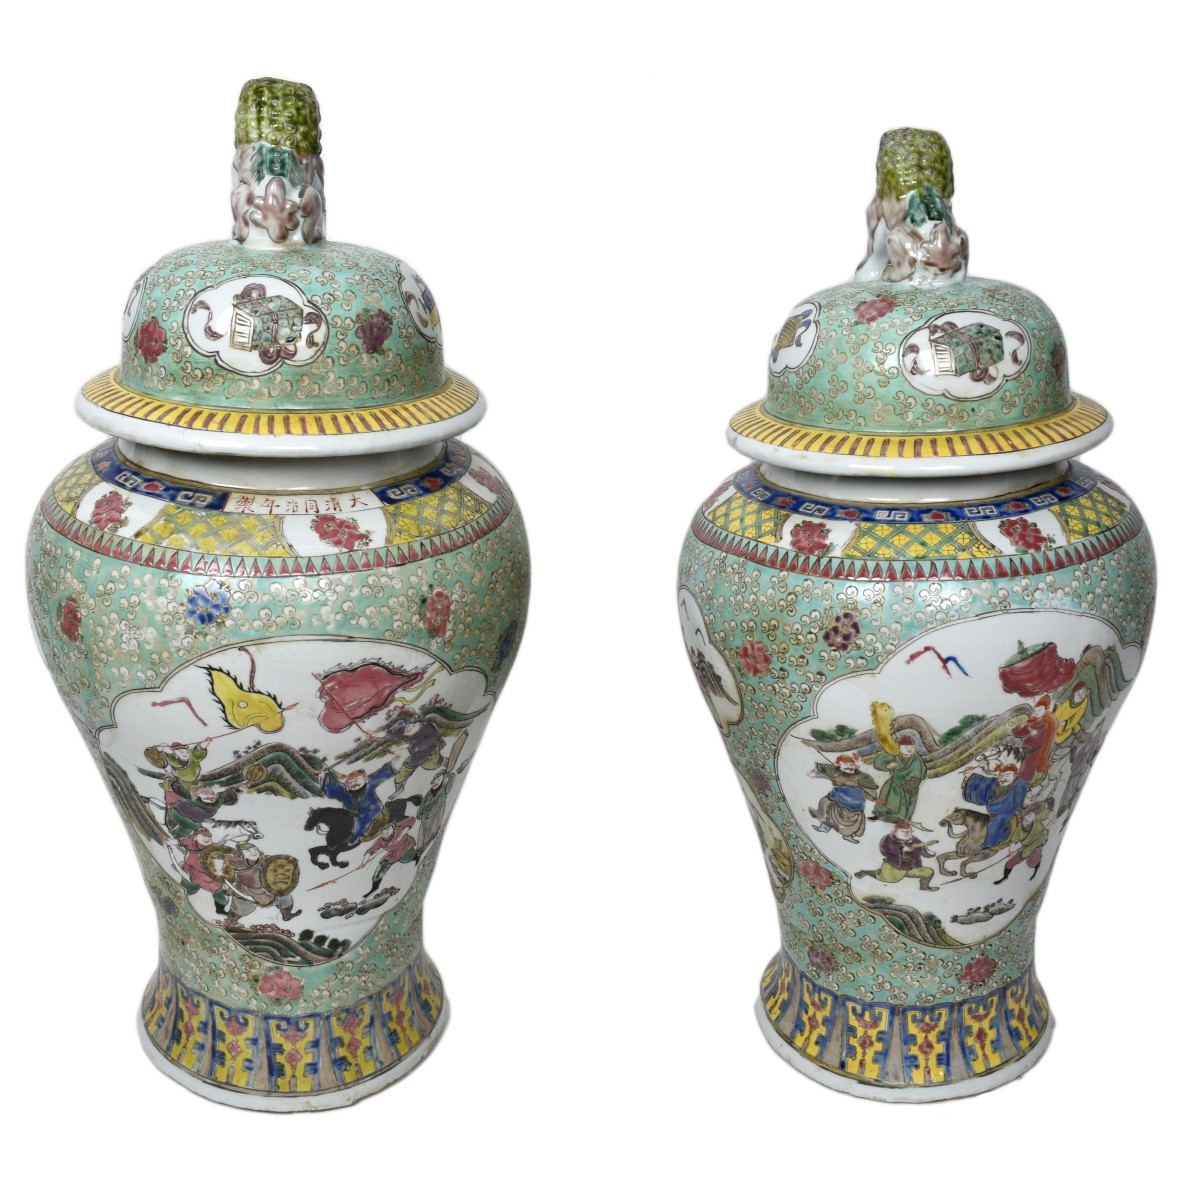 Pair of Chinese Covered Jars